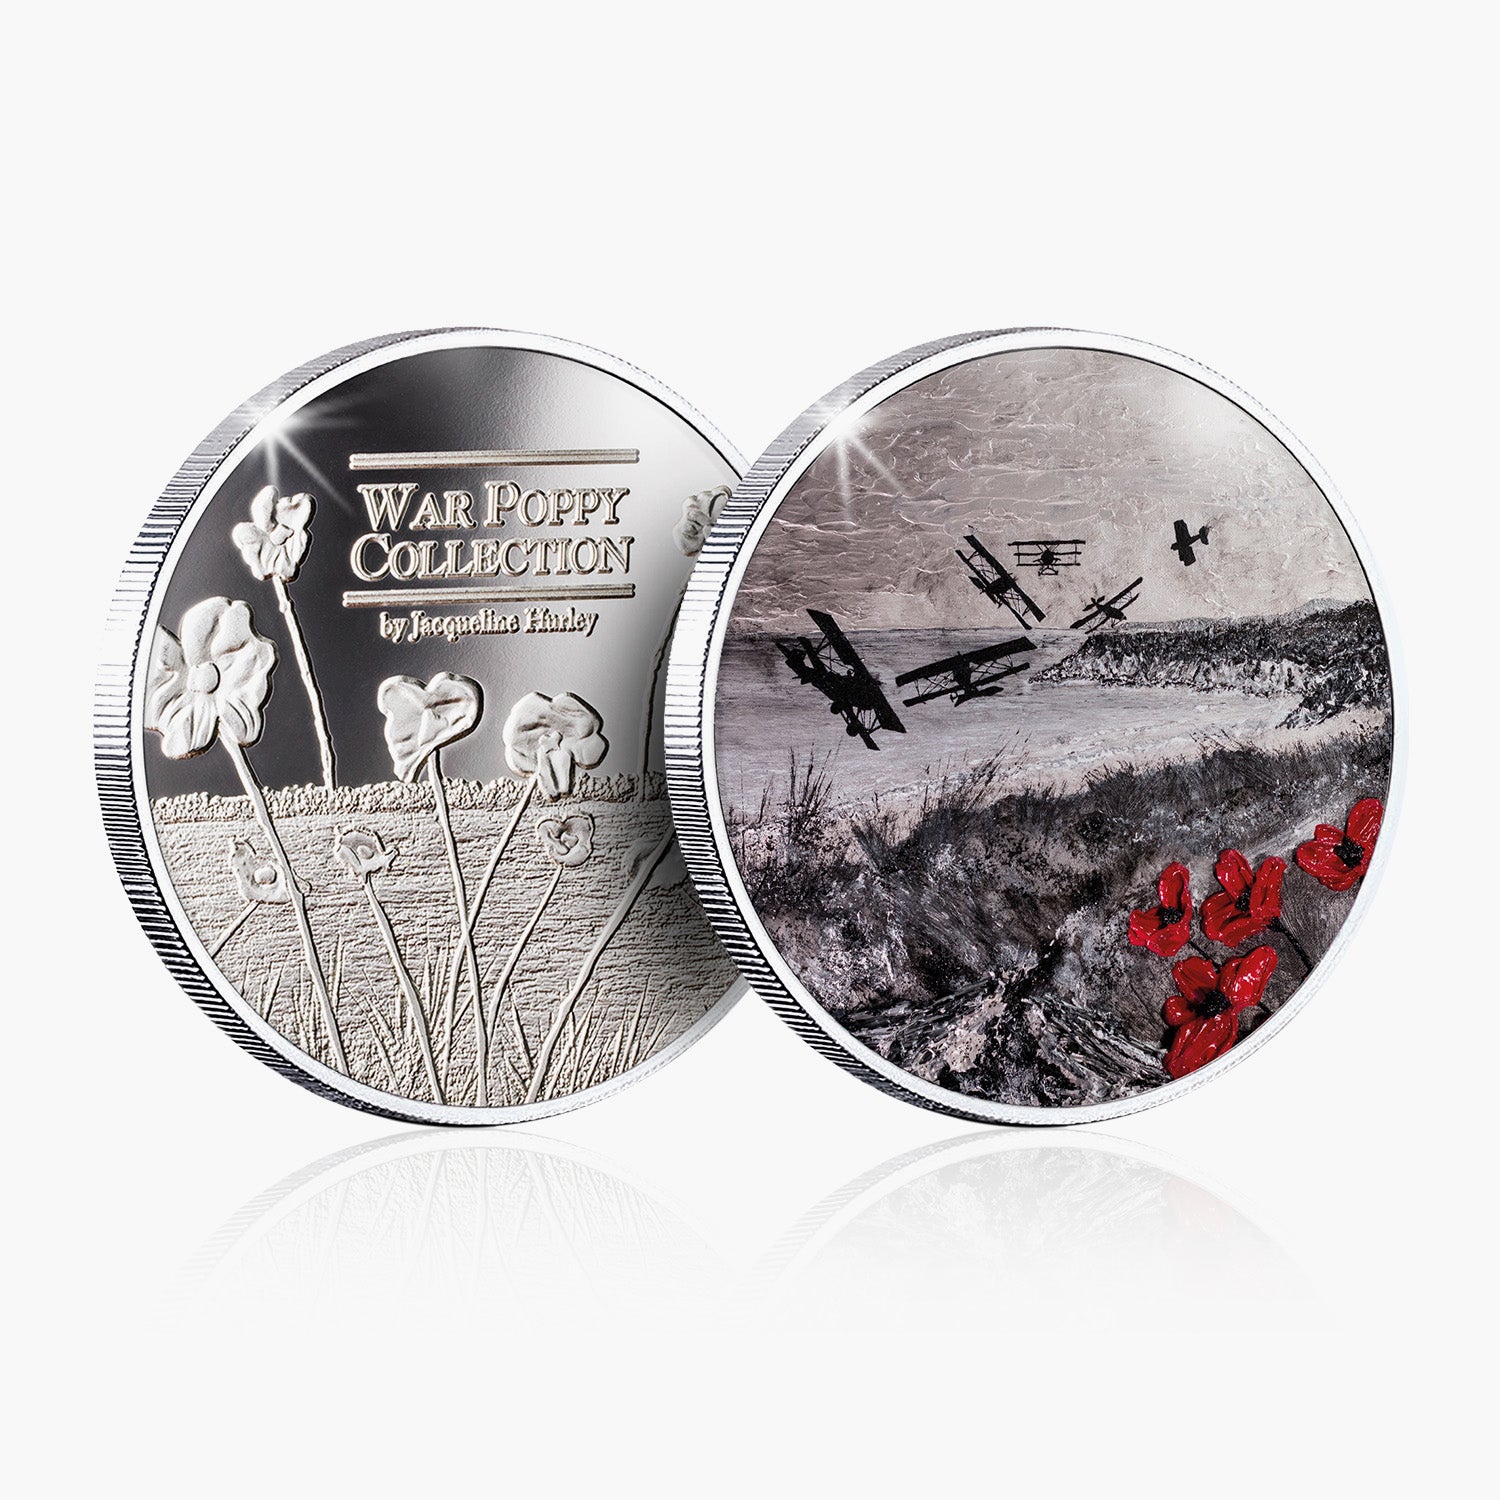 Below The Brave Silver-Plated Commemorative